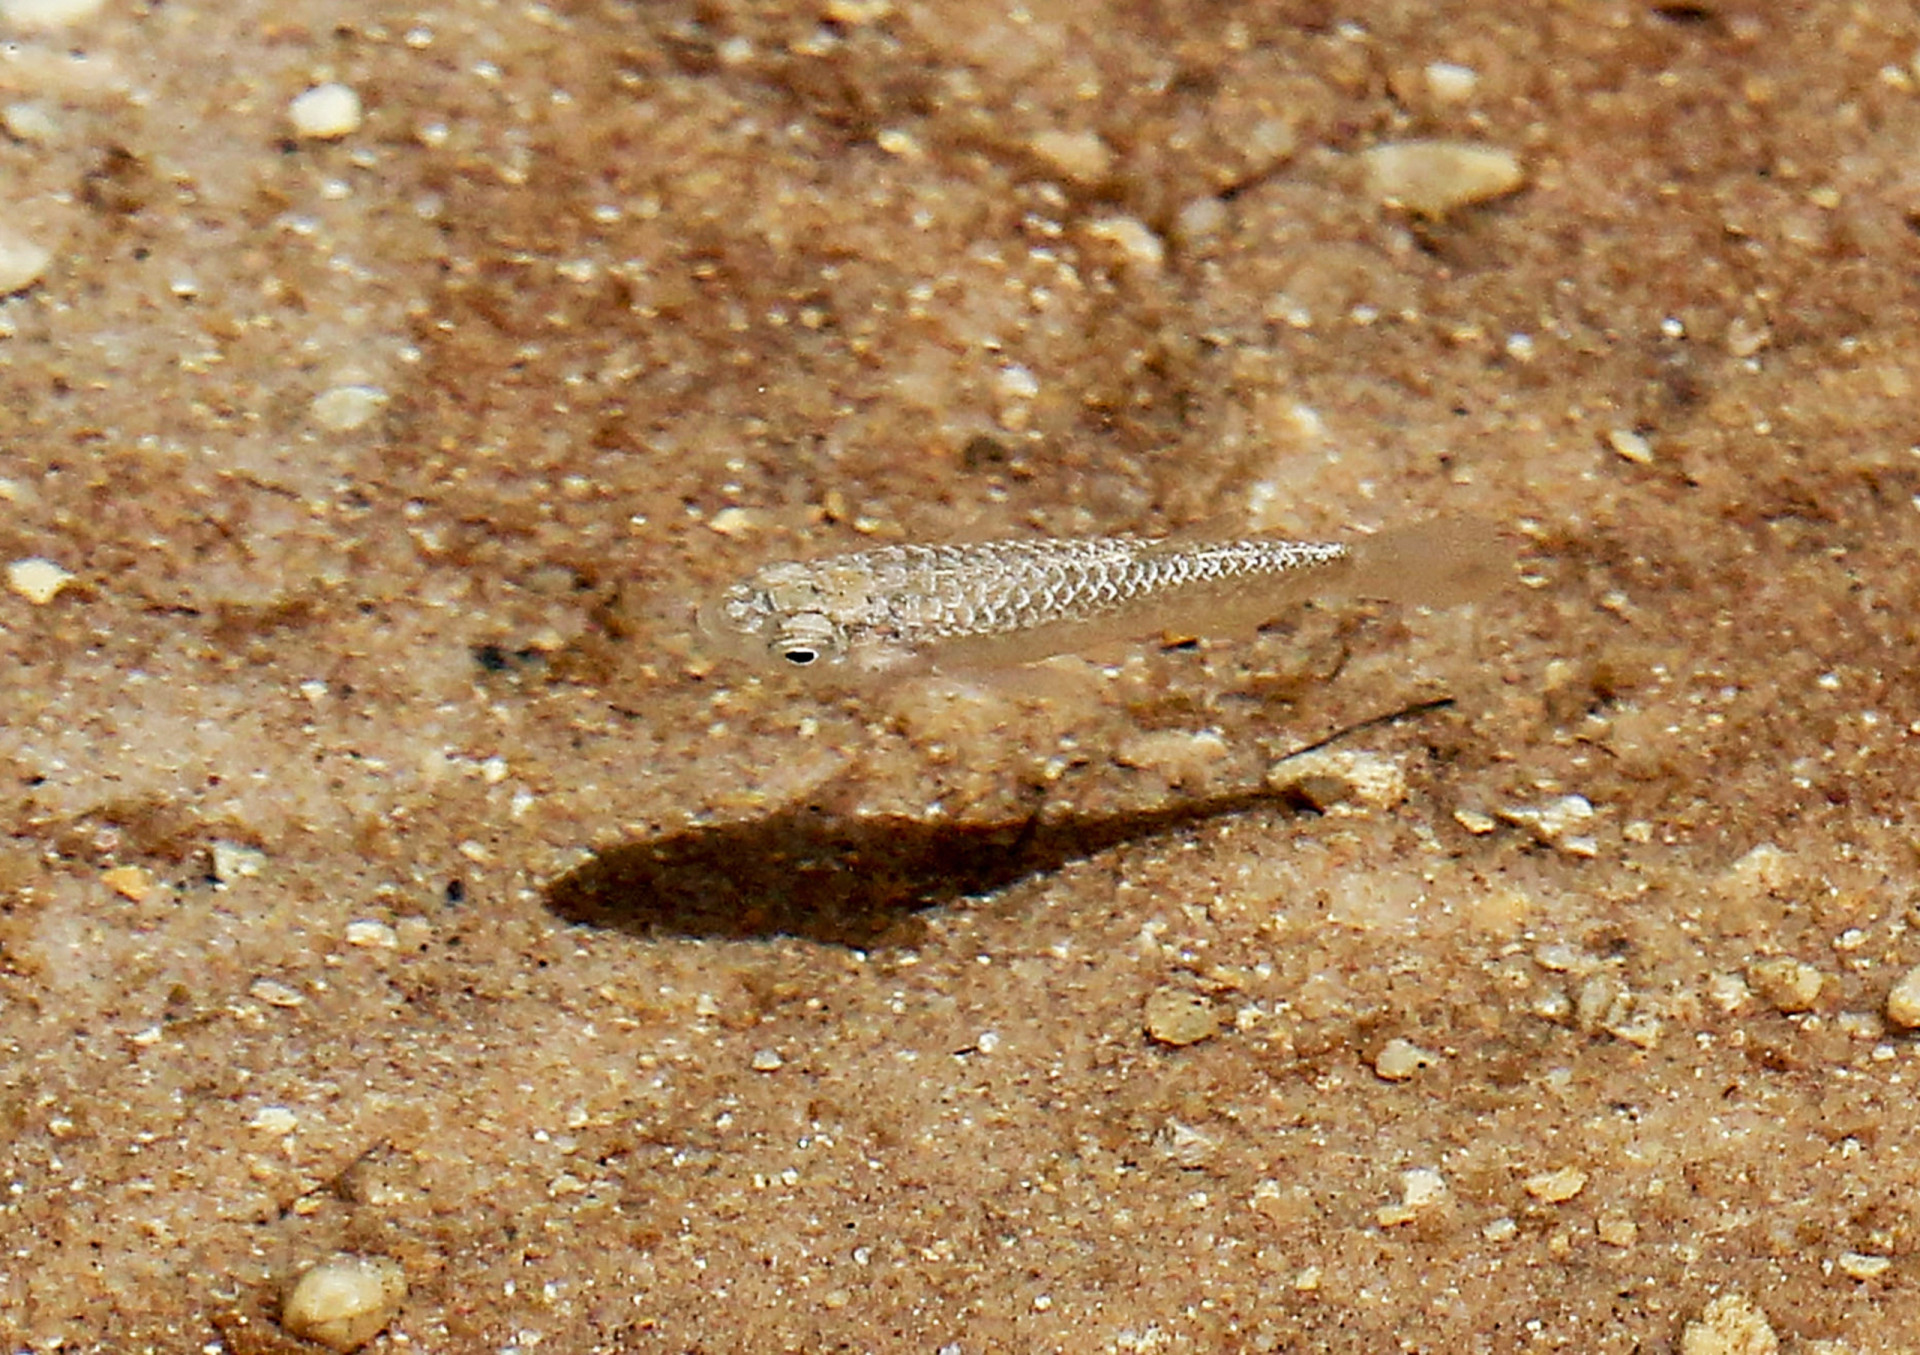 <p>The species of fish recorded by photographer Noam Bedein has yet to be officially identified. Meanwhile, the closest any known fish has come to the ancient salt lake is the Dead Sea toothcarp. Endemic to the Dead Sea basin, the one seen in this image is cared for at Jordan's Fifa Nature Reserve, located some 60 km (36 mi) south of the Dead Sea. This tiny fish is so rare that it's listed as Endangered by the International Union for Conservation of Nature (IUCN).</p><p>You may also like:<a href="https://www.starsinsider.com/n/483553?utm_source=msn.com&utm_medium=display&utm_campaign=referral_description&utm_content=573453en-en"> Celebrities involved in fatal accidents</a></p>